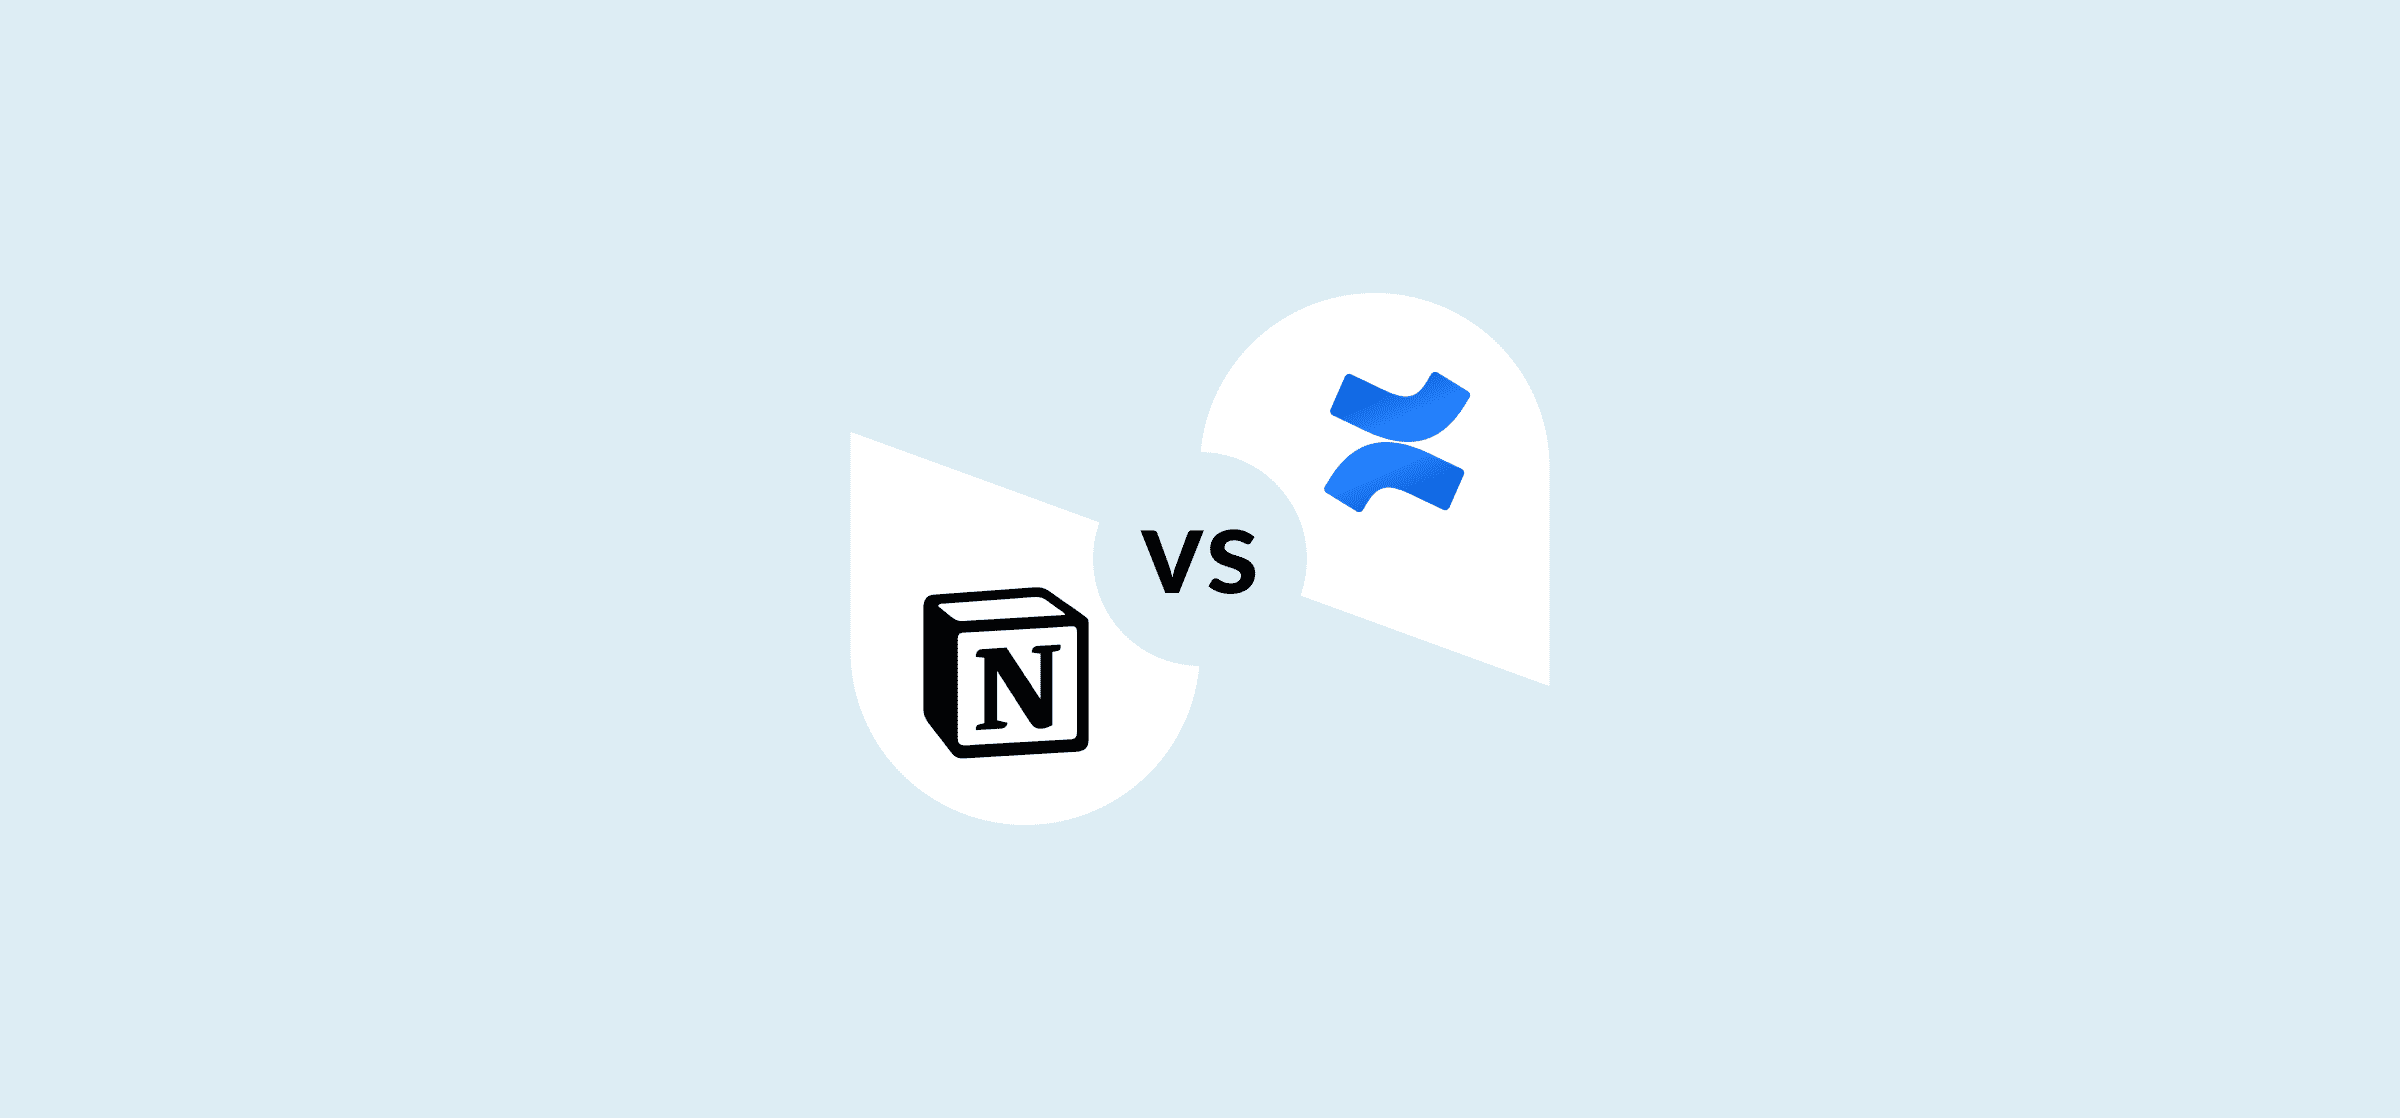 Logos for Notion and Confluence, representing a post comparing Notion vs. Confluence.